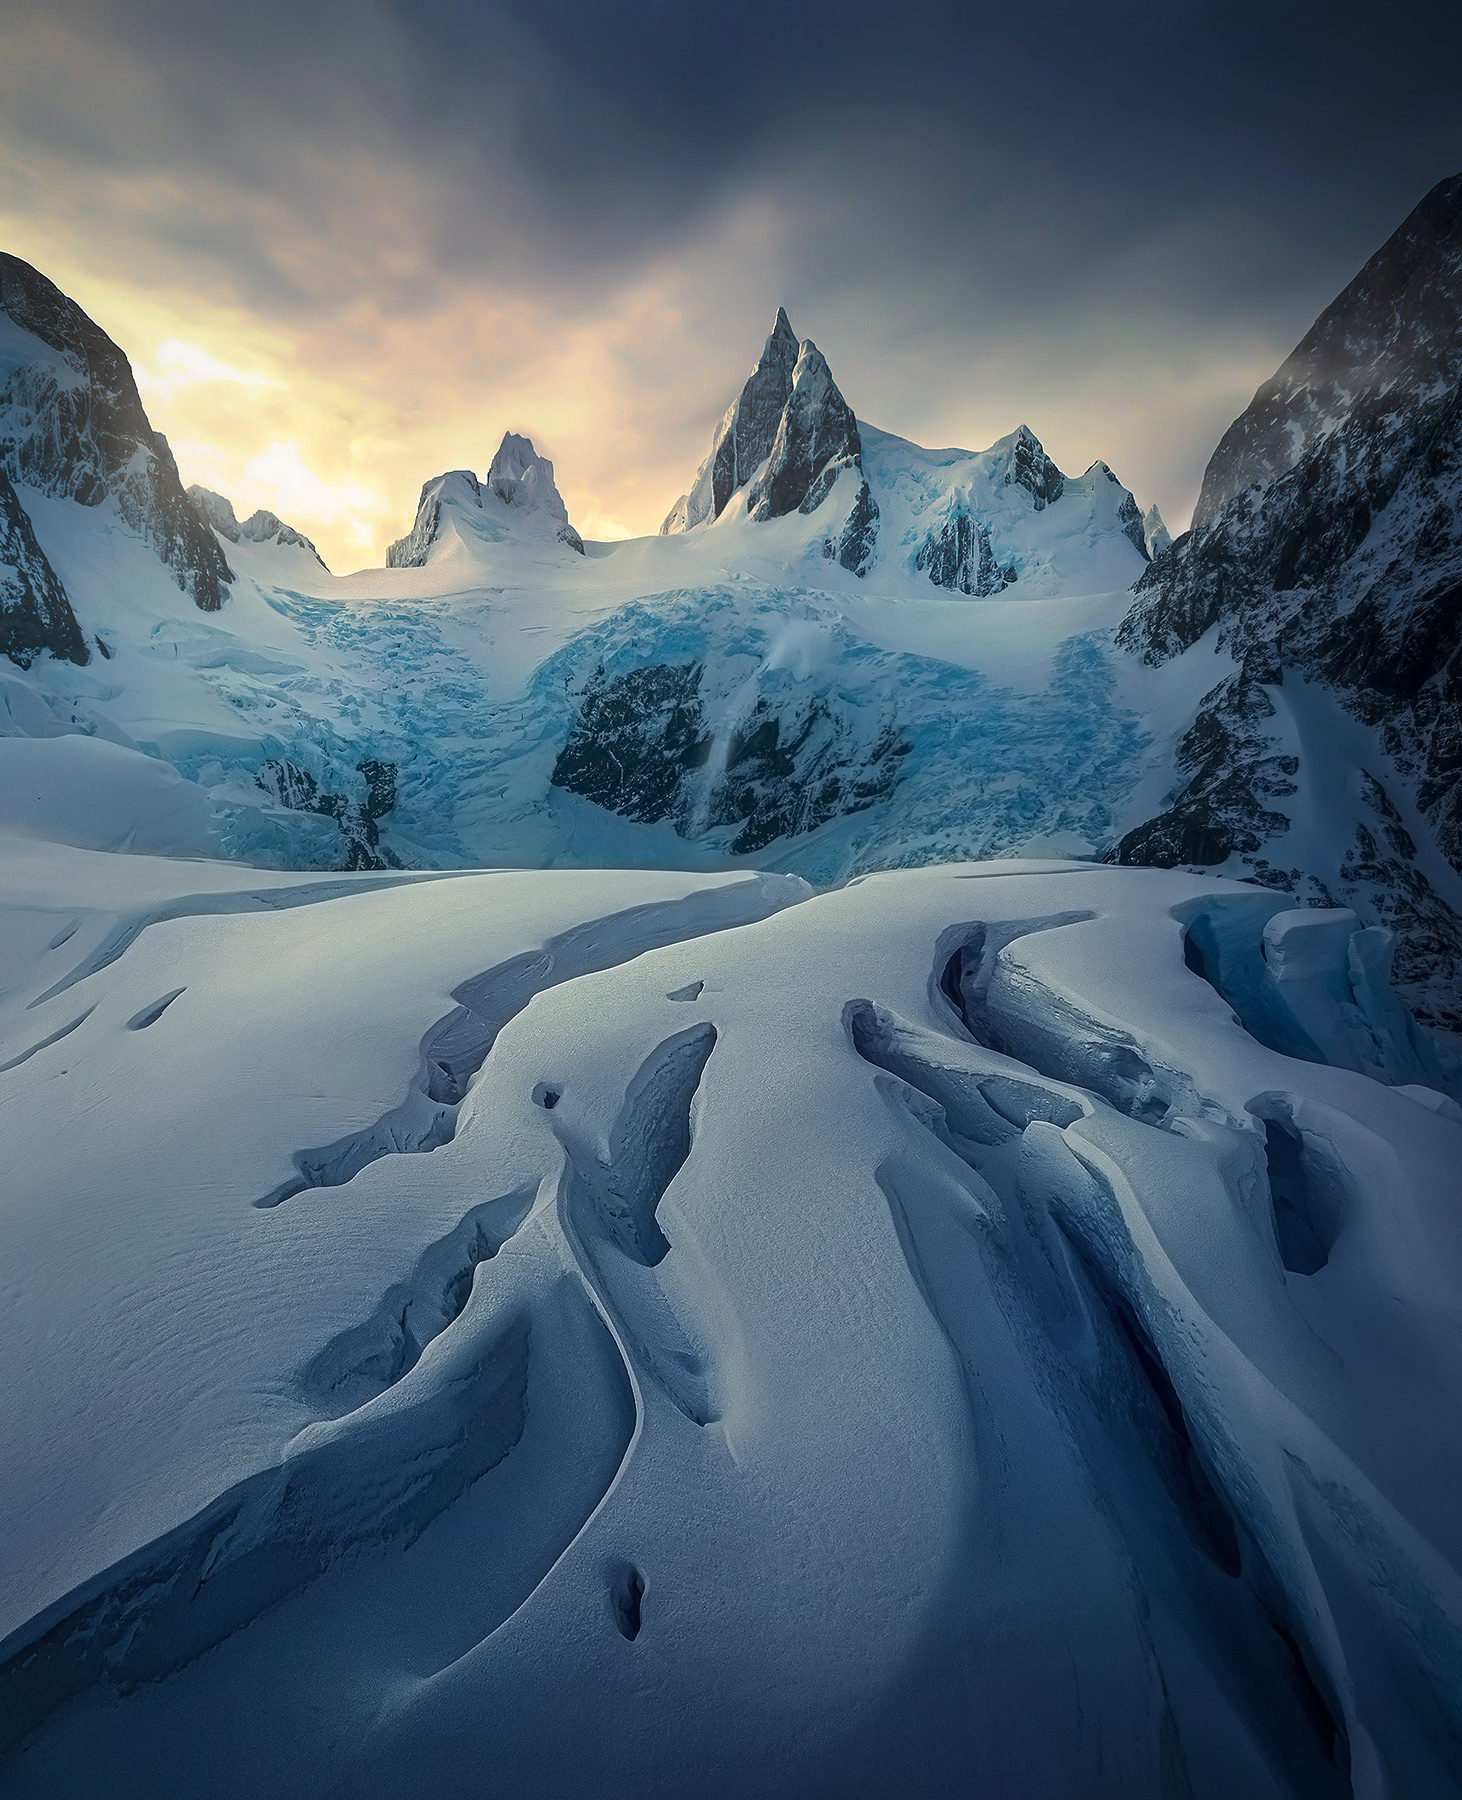 Glacial crevasses extend outward towards the jagged peaks deep within Patagonian Fjords, Chile